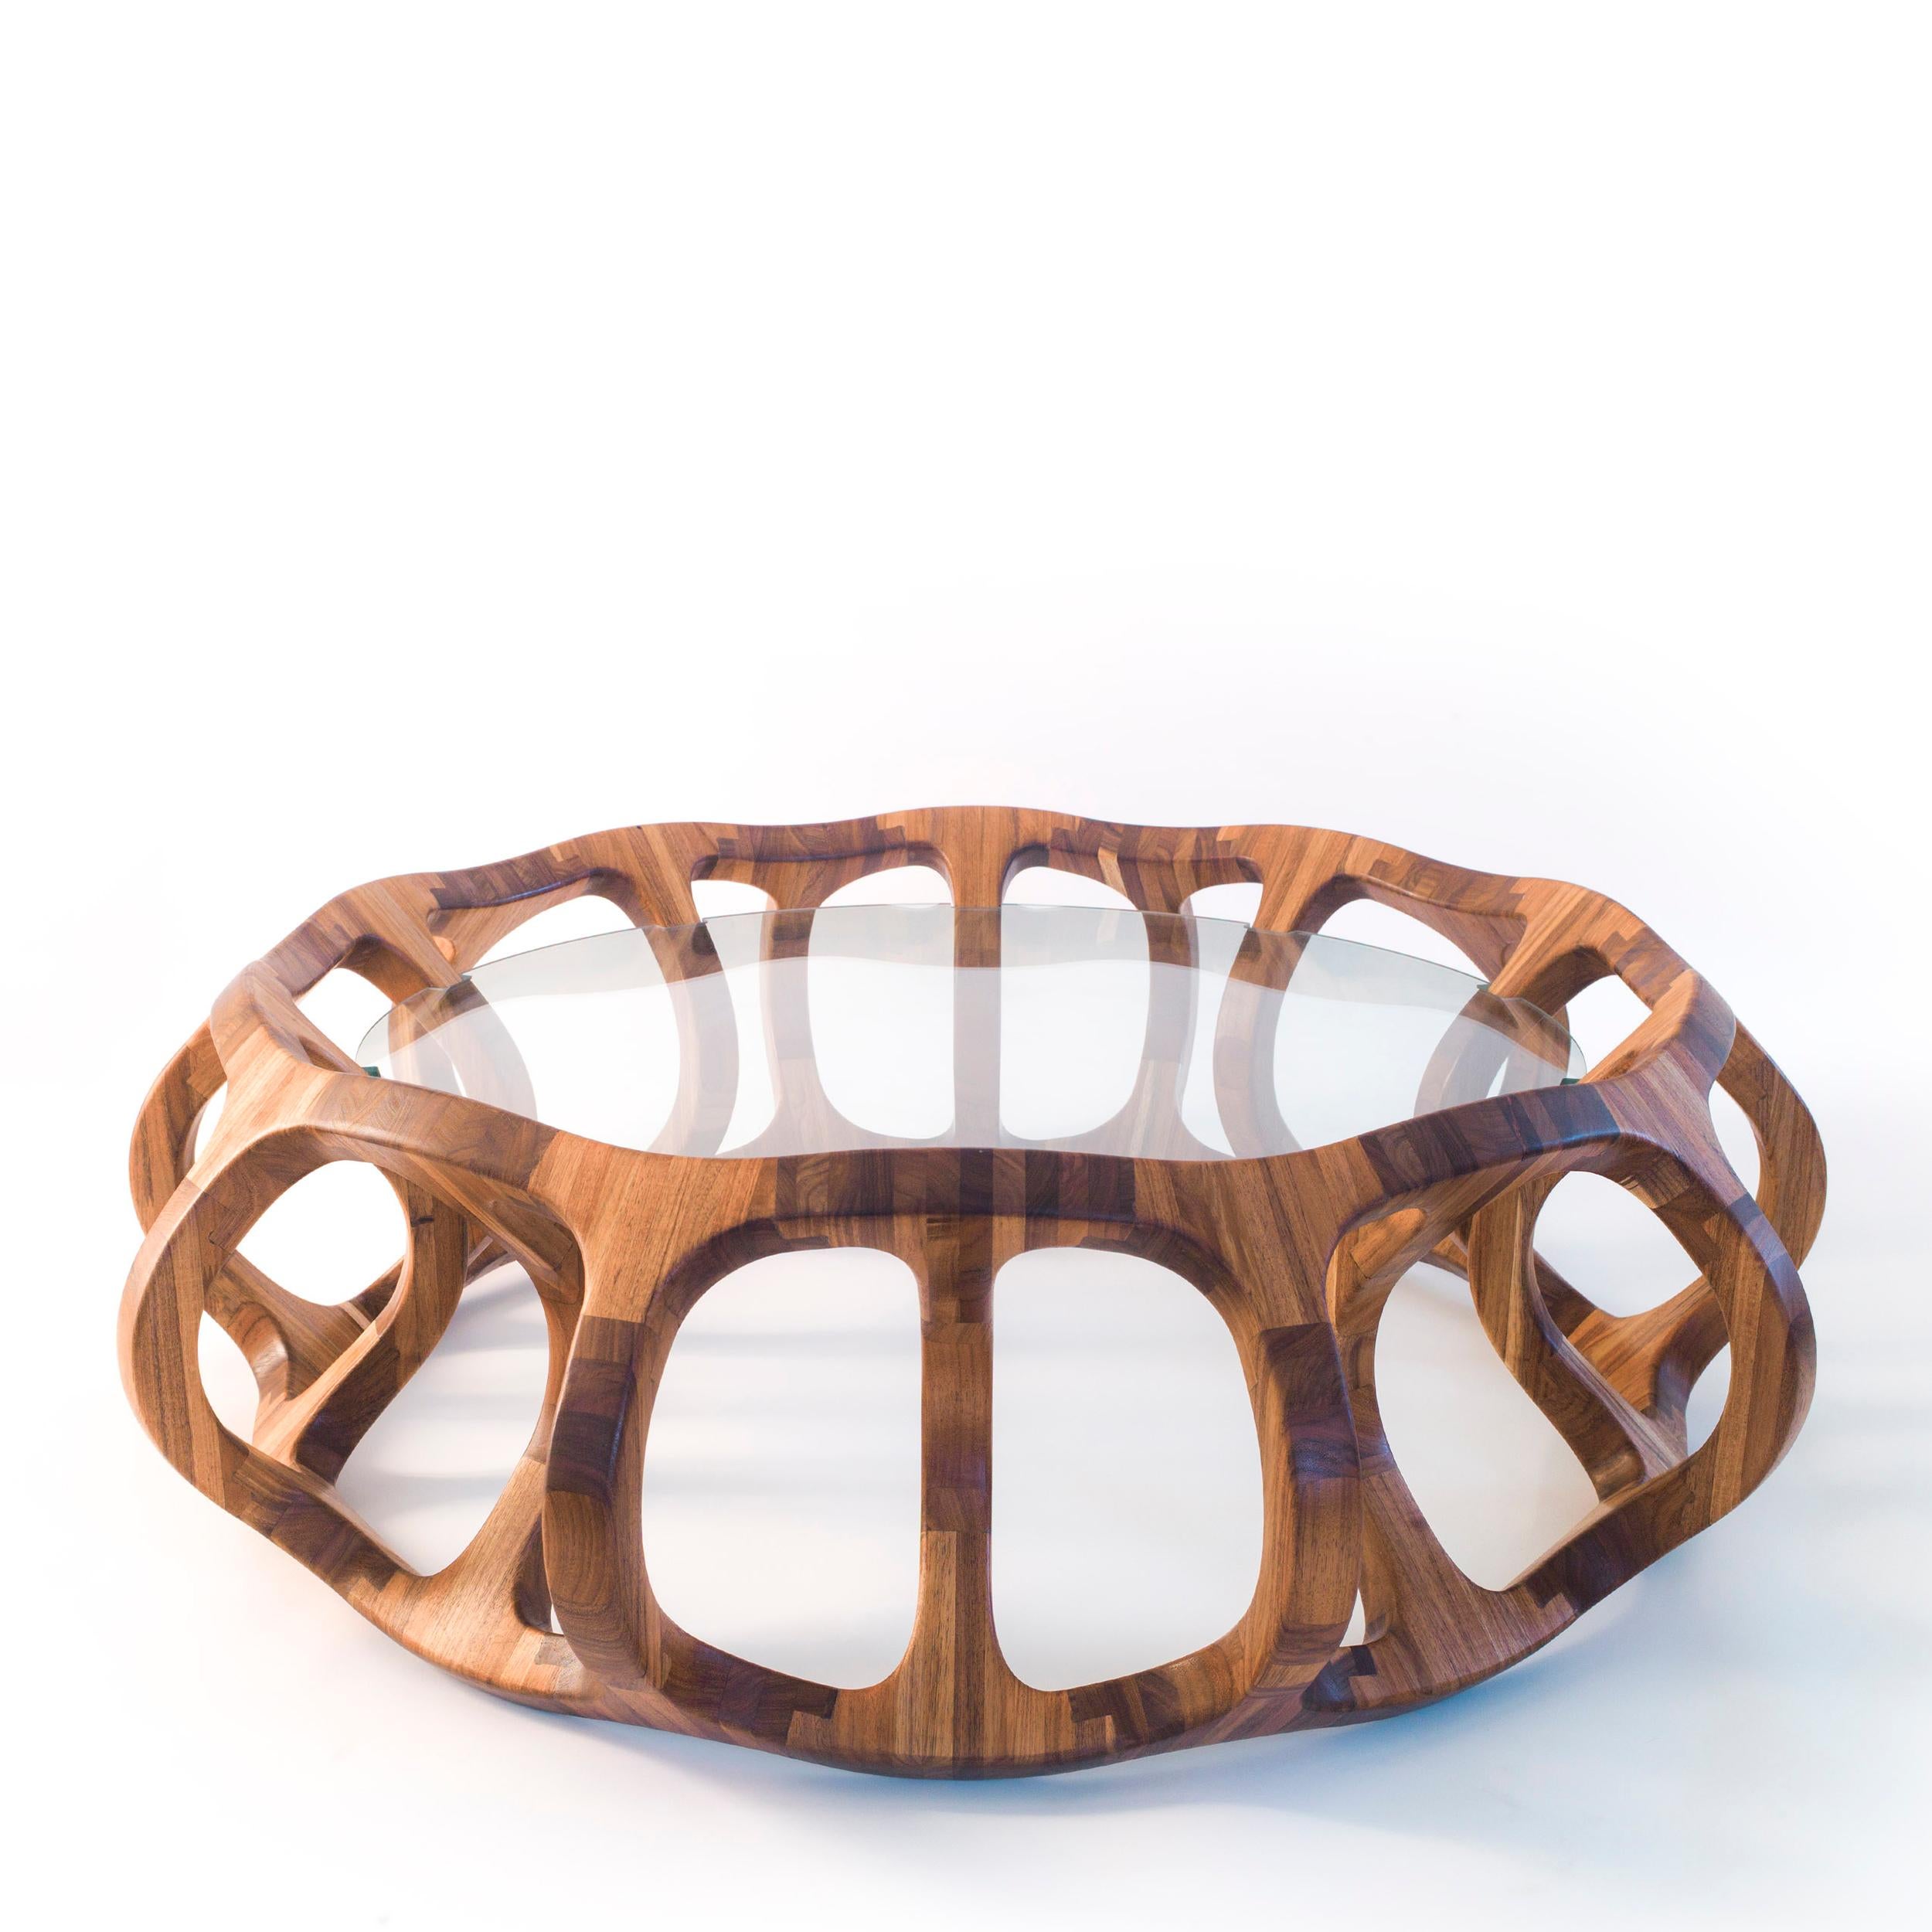 Contemporary Toro G10, Geometric Sculptural Center Table Made of Solid Wood by Pedro Cerisola For Sale